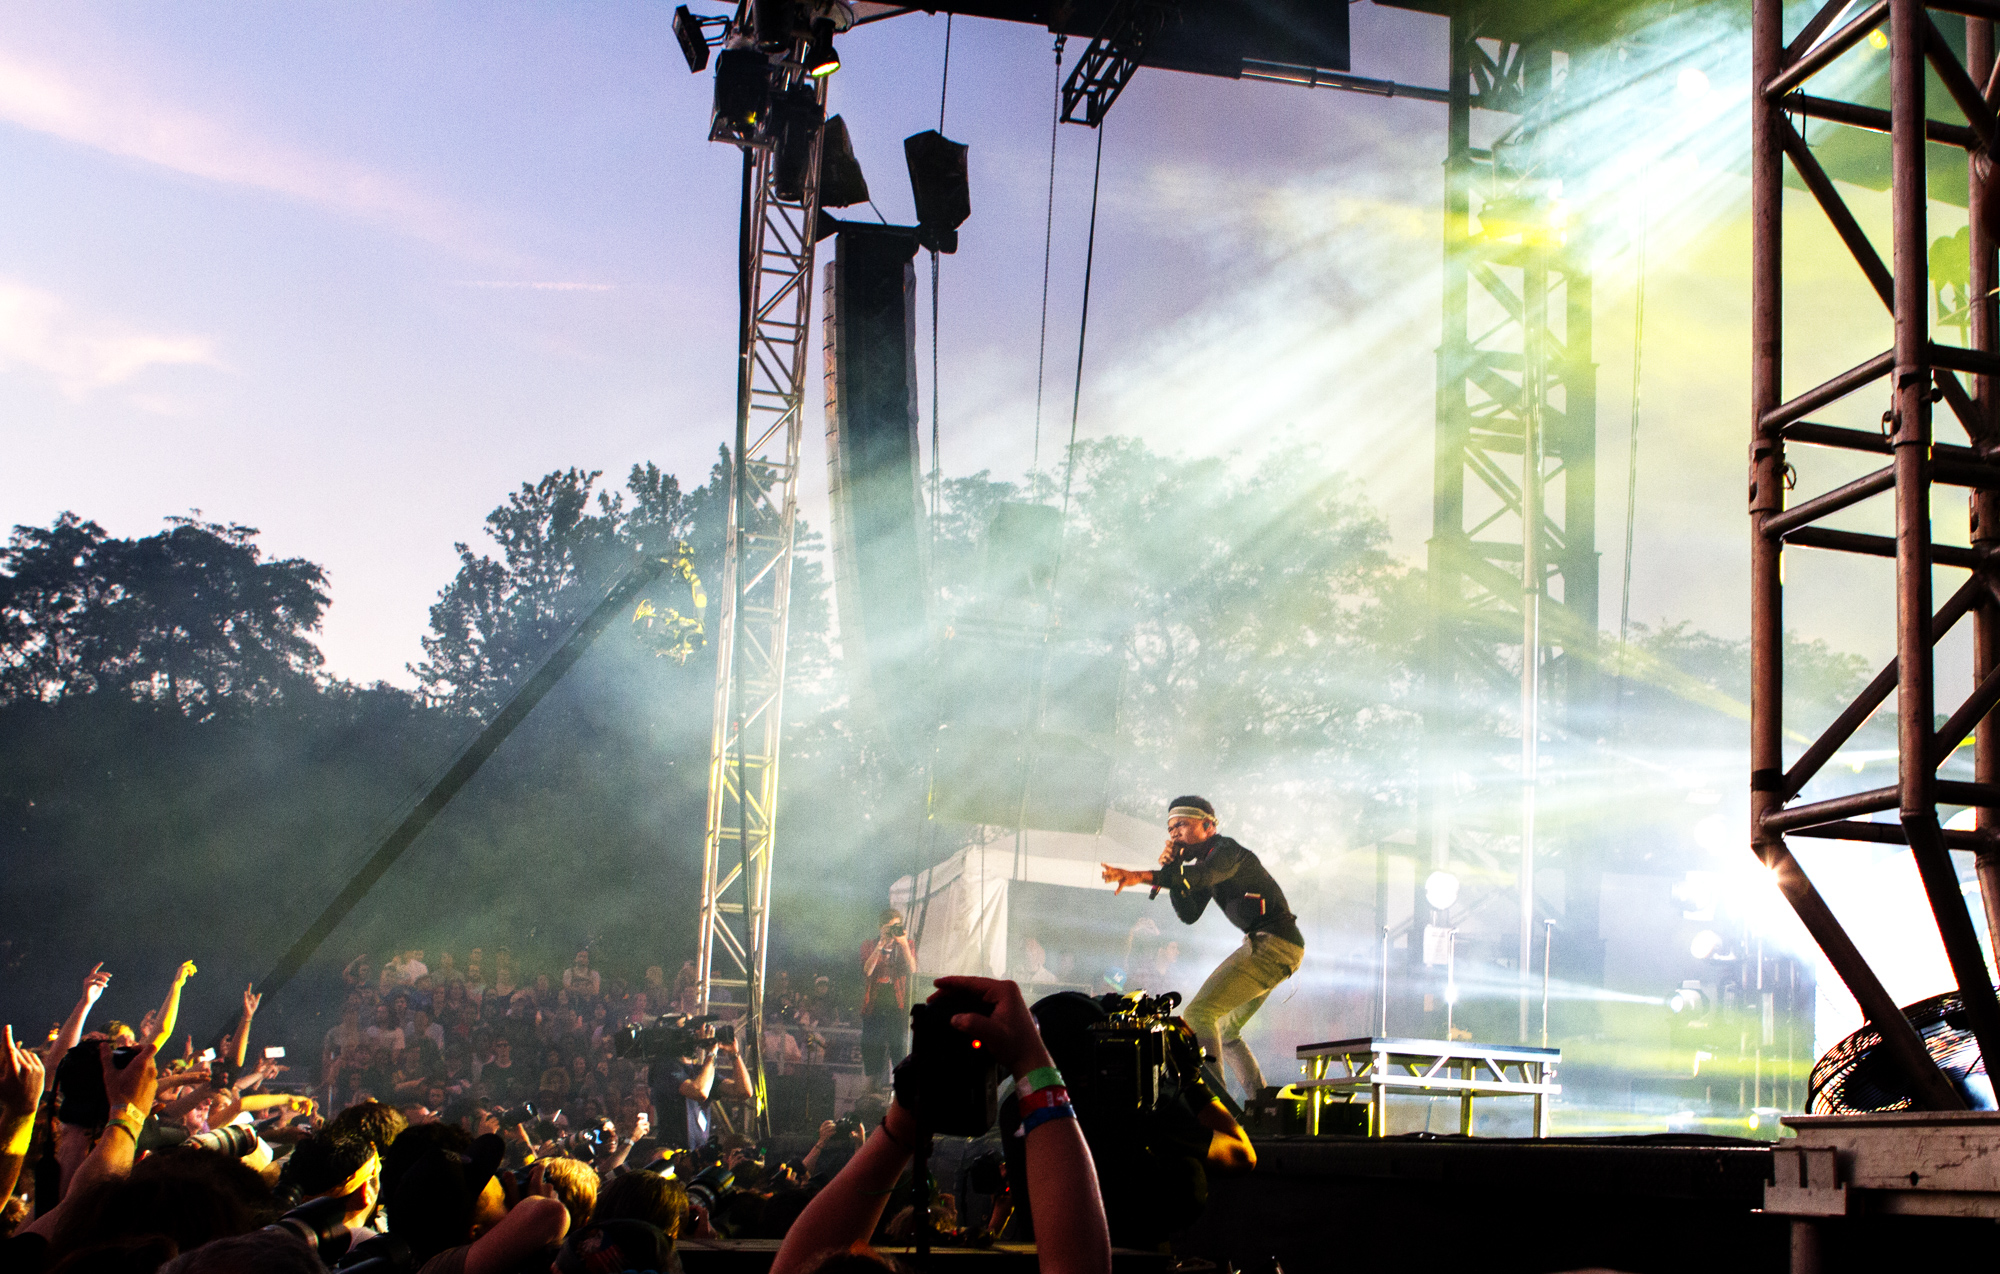 Chance the Rapper at Pitchfork Music Festival